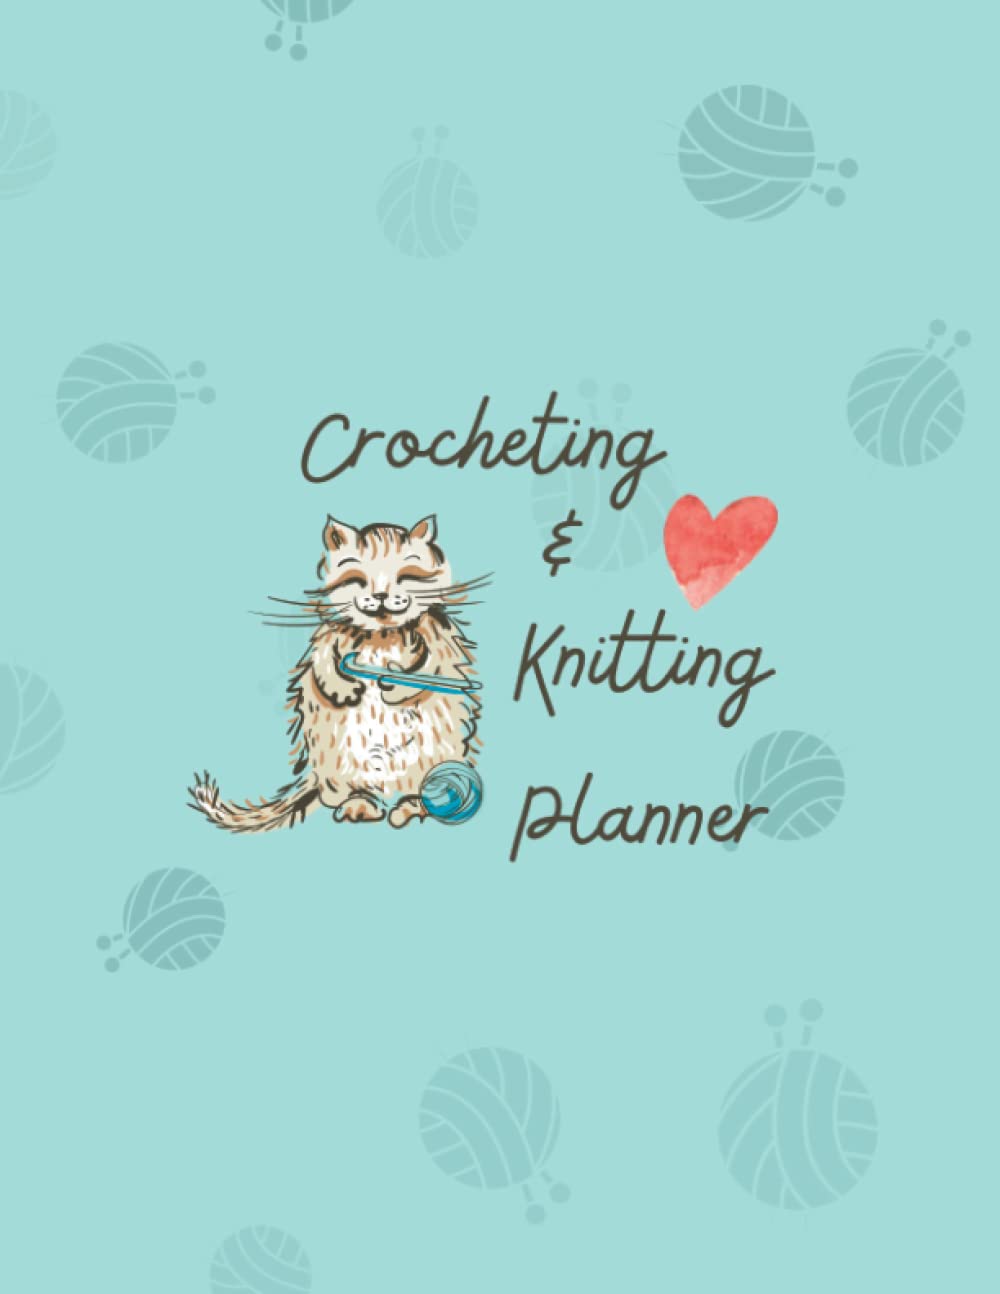 Crocheting & Knitting Planner: 100 page planner to plan, design and keep track of projects, patterns and yarn.